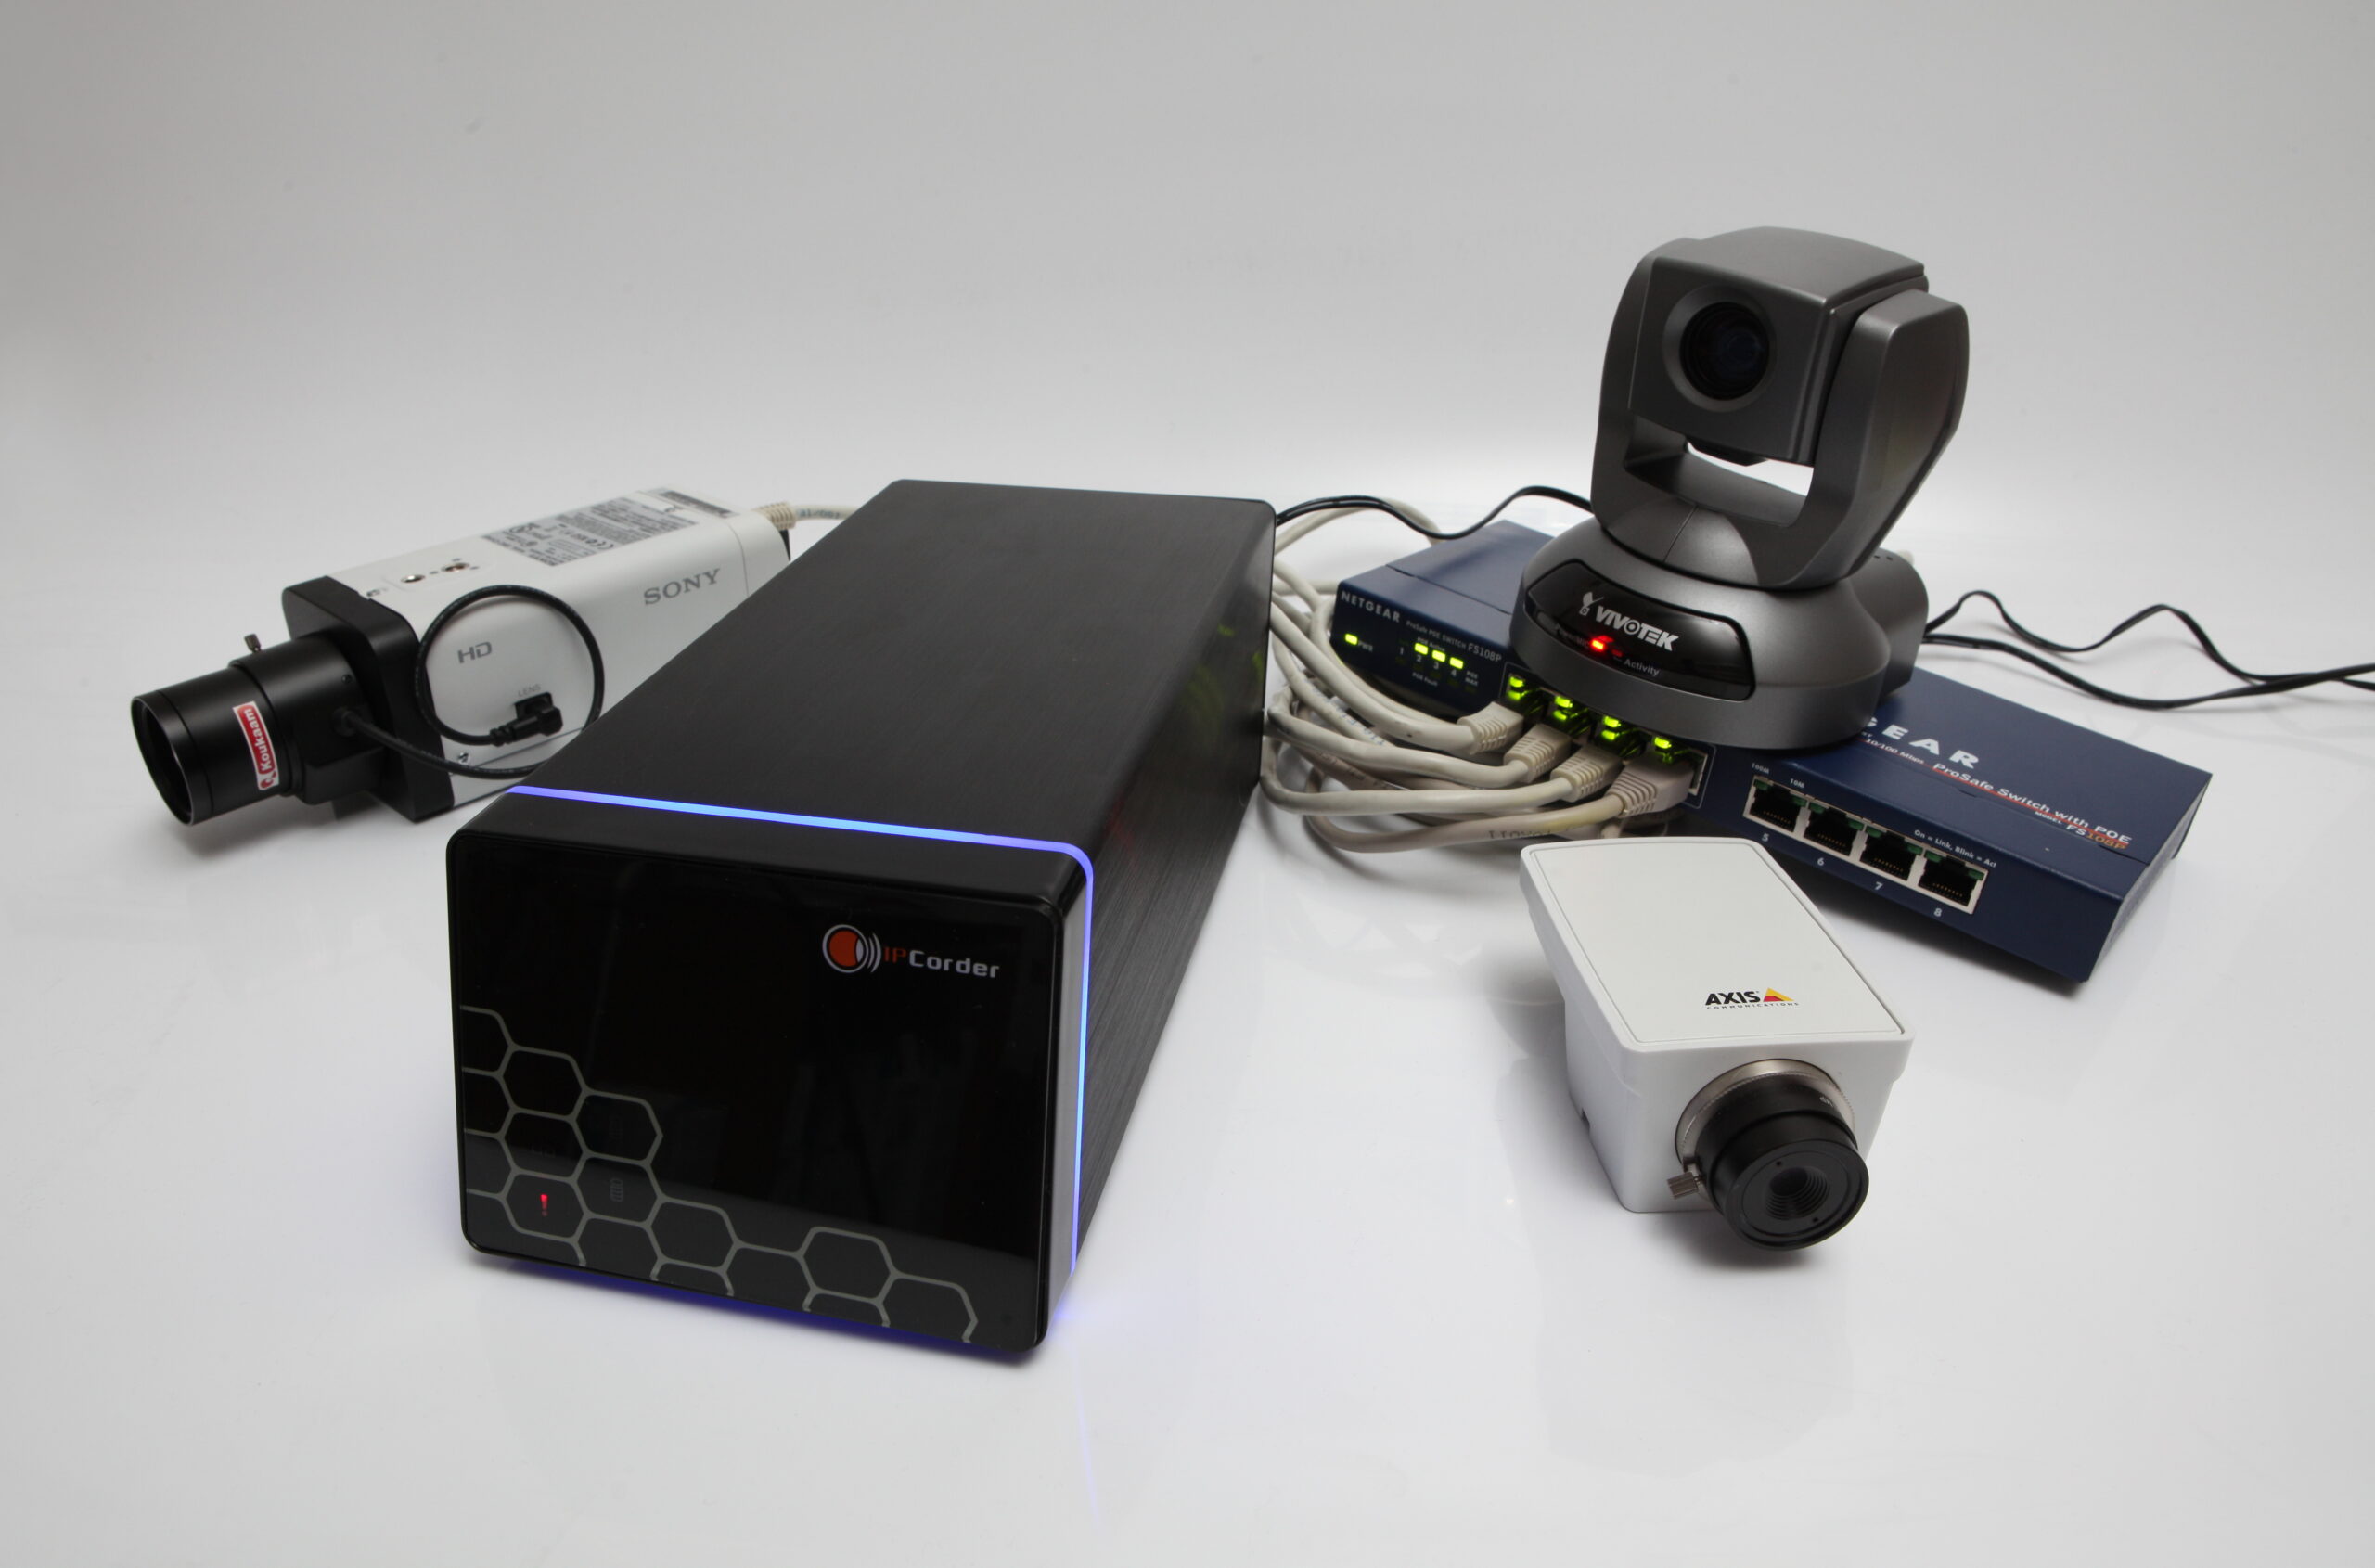 IP Security systems cameras and recorder